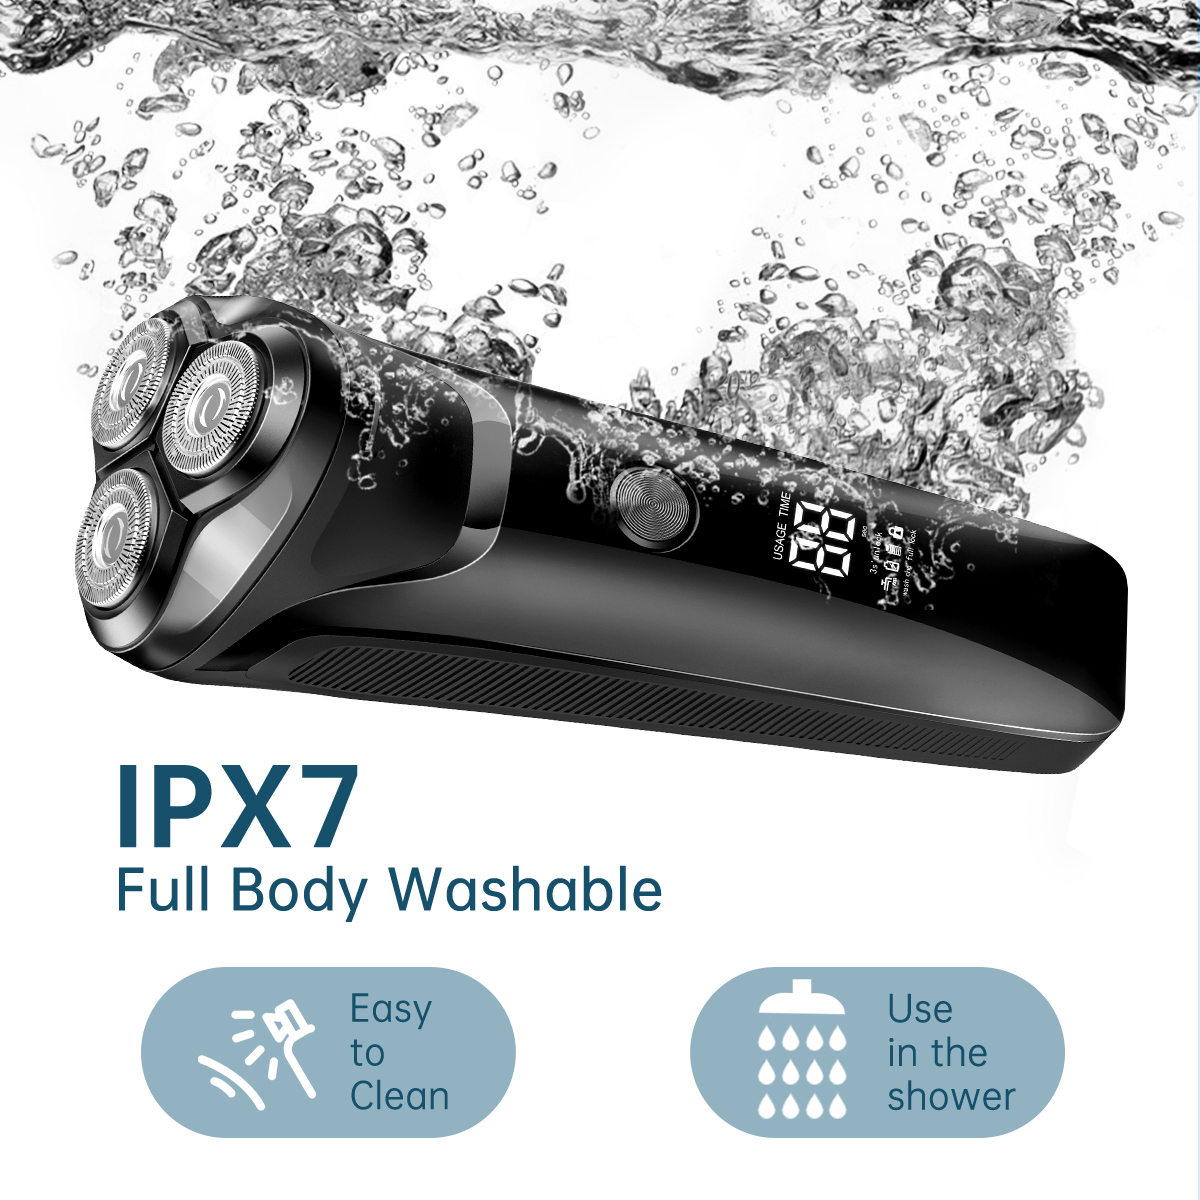 Men's Electric Razor, 2 in 1 4D Electric Rotary Shaver Cordless Rechargeable Face Beard Trimmer IPX7 Waterproof Dry/Wet, W/ LED Display & Holder for Husband Dad Travel - image 5 of 8